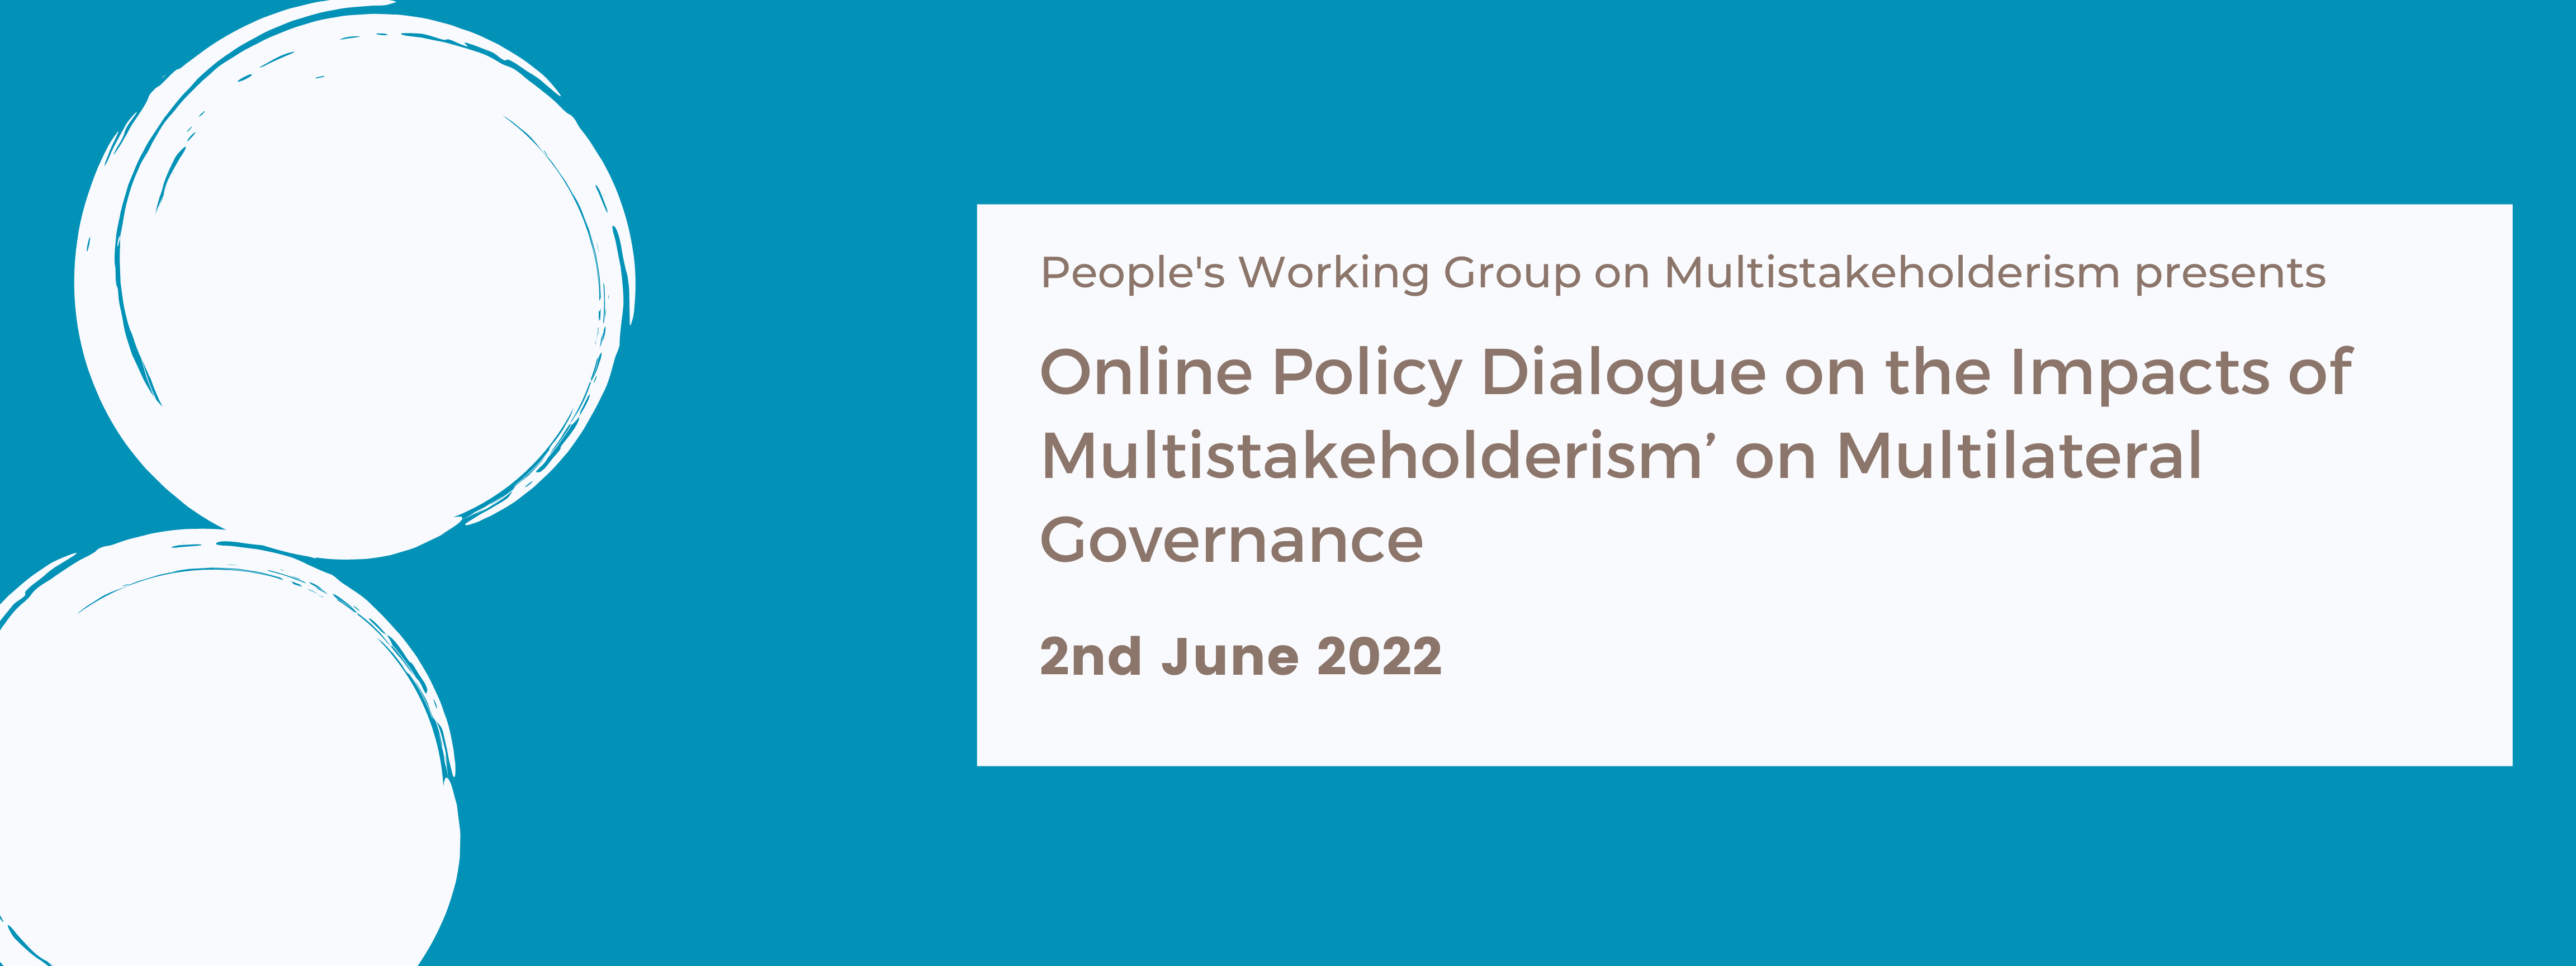 Online Policy Dialogue on the Impacts of Multistakeholderism’ on Multilateral Governance